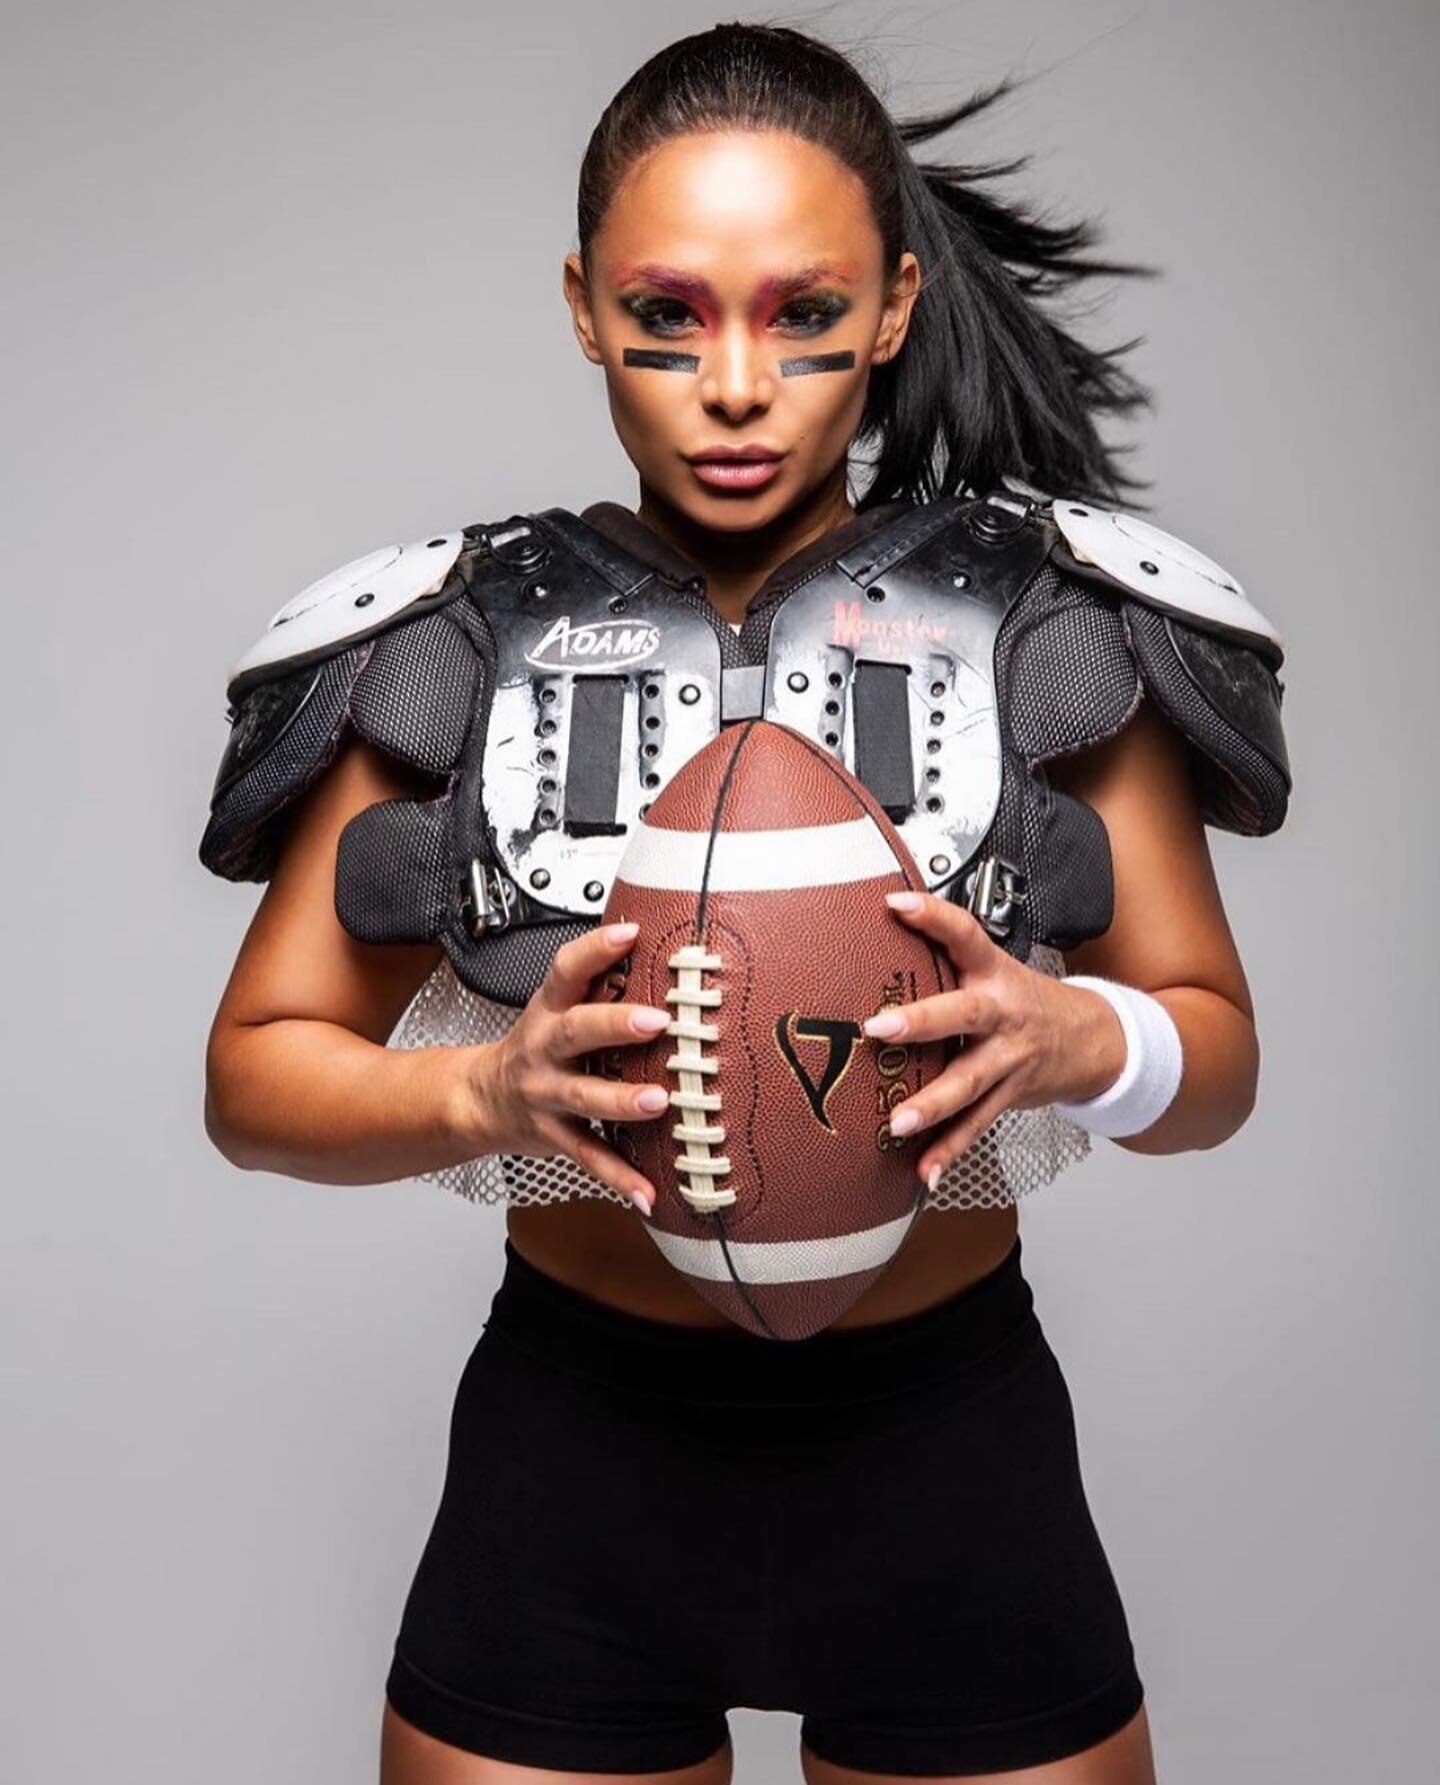 #reposting my girl @katiechunghua because YAY football is back ❤️. I don&rsquo;t watch football, but I&rsquo;m excited for the normalcy and camaraderie!

#hair and #makeup @sheena_zar 
#photography @devargas_photo 
@lasvegasweekly